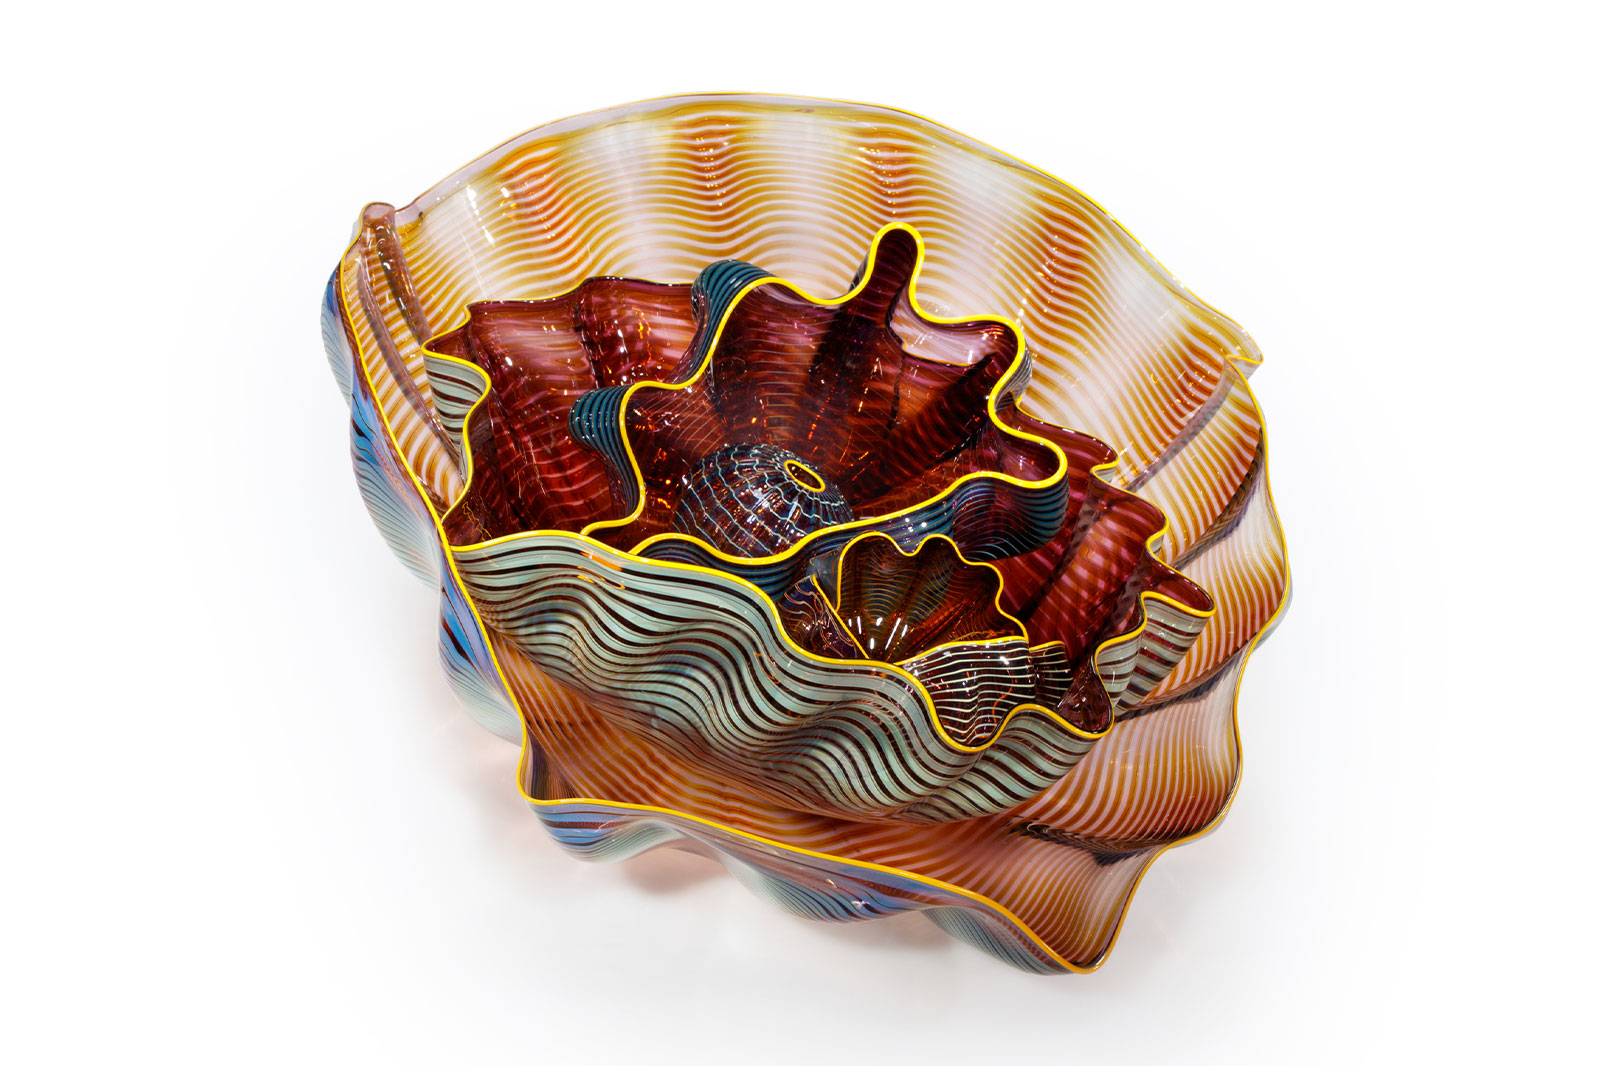 Iridescent Violet and Amber Seaform with Gold Lip Wraps, 1999, by Dale Chihuly